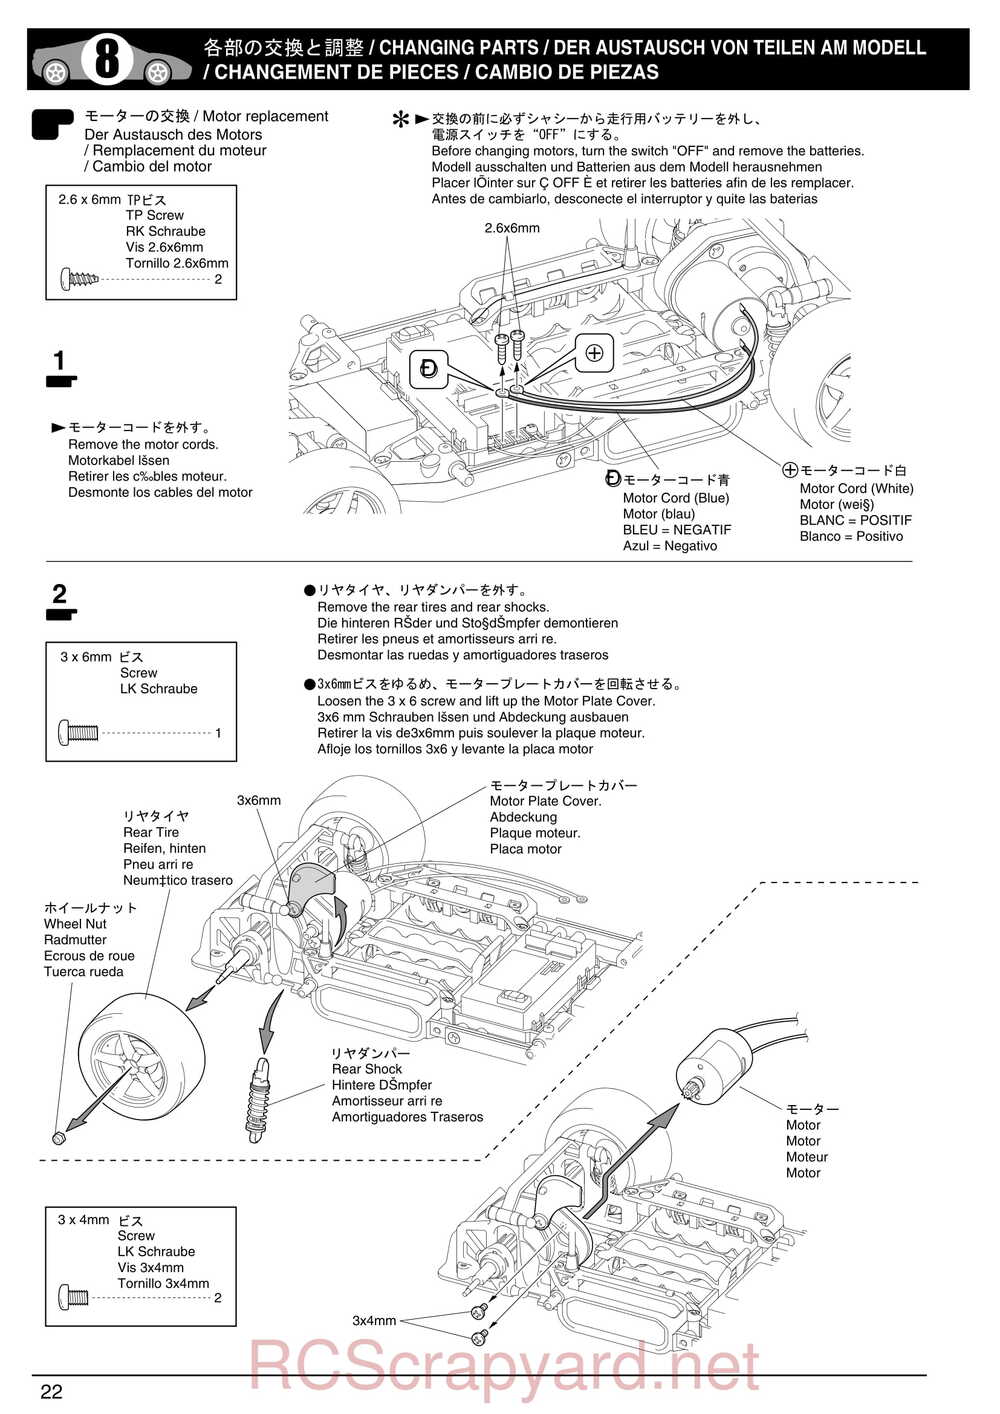 Kyosho - 30551 - a12 Sport - Manual - Page 22